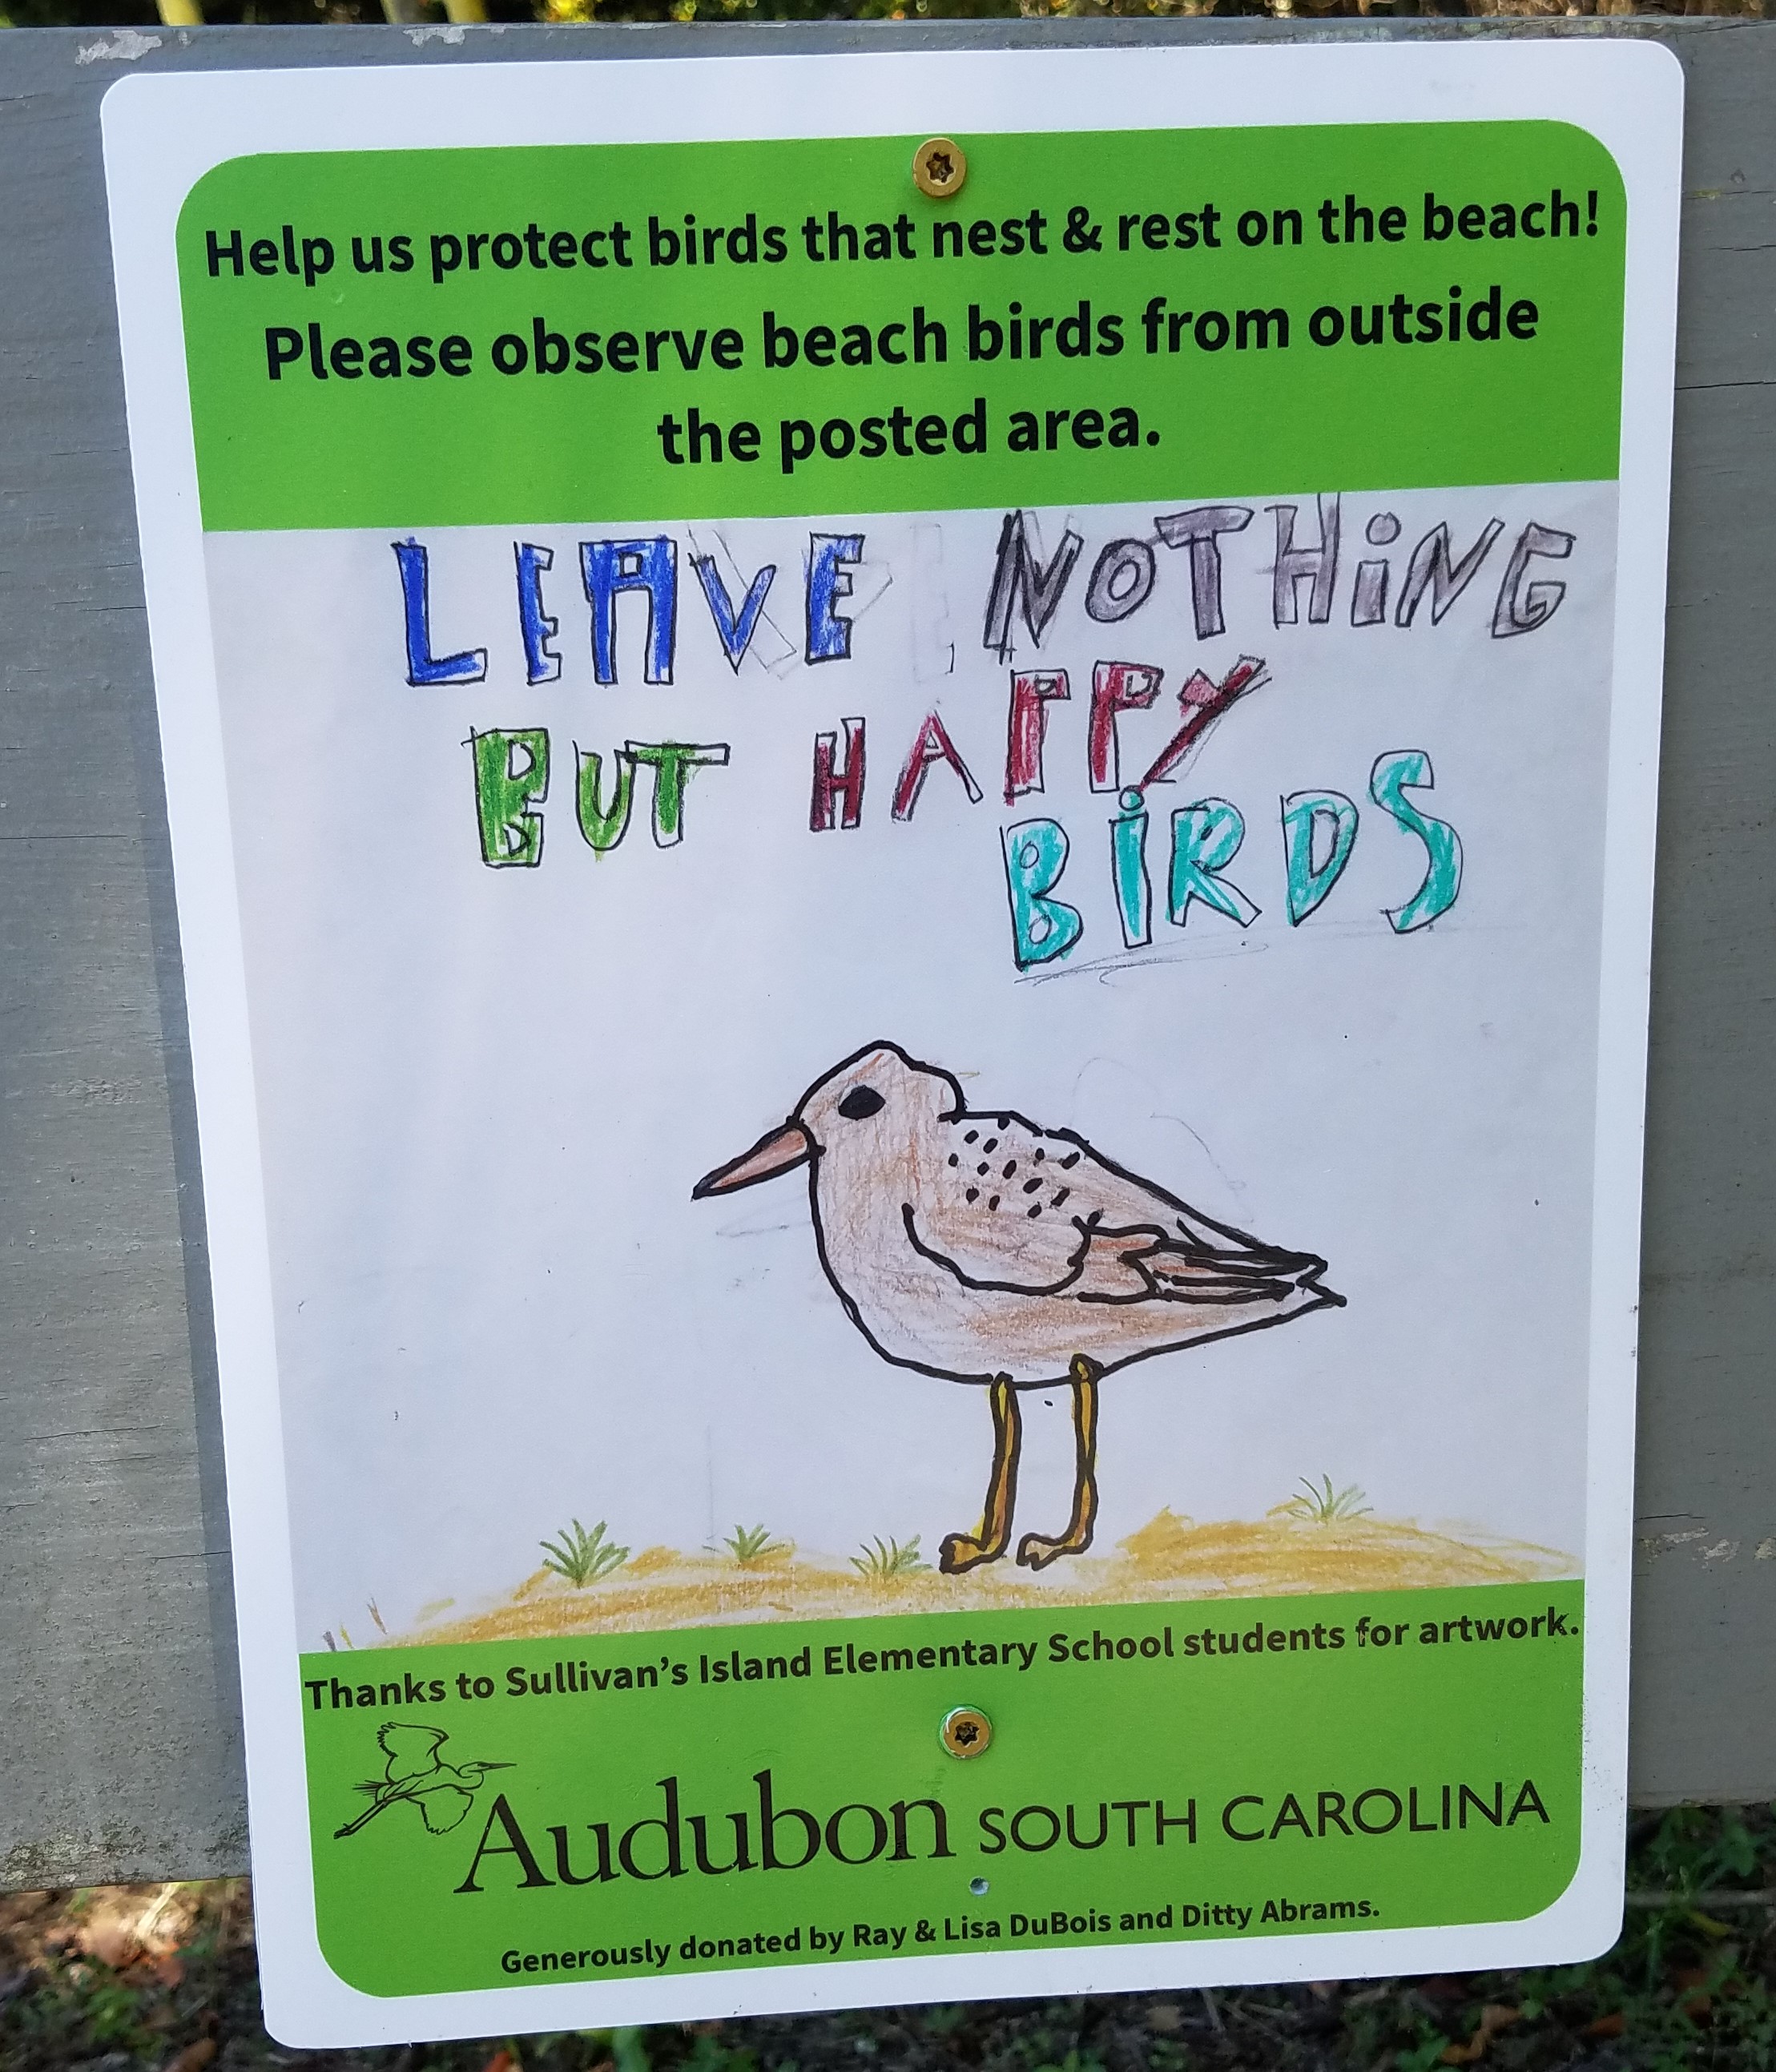 Leave Nothing But Happy Birds Picture